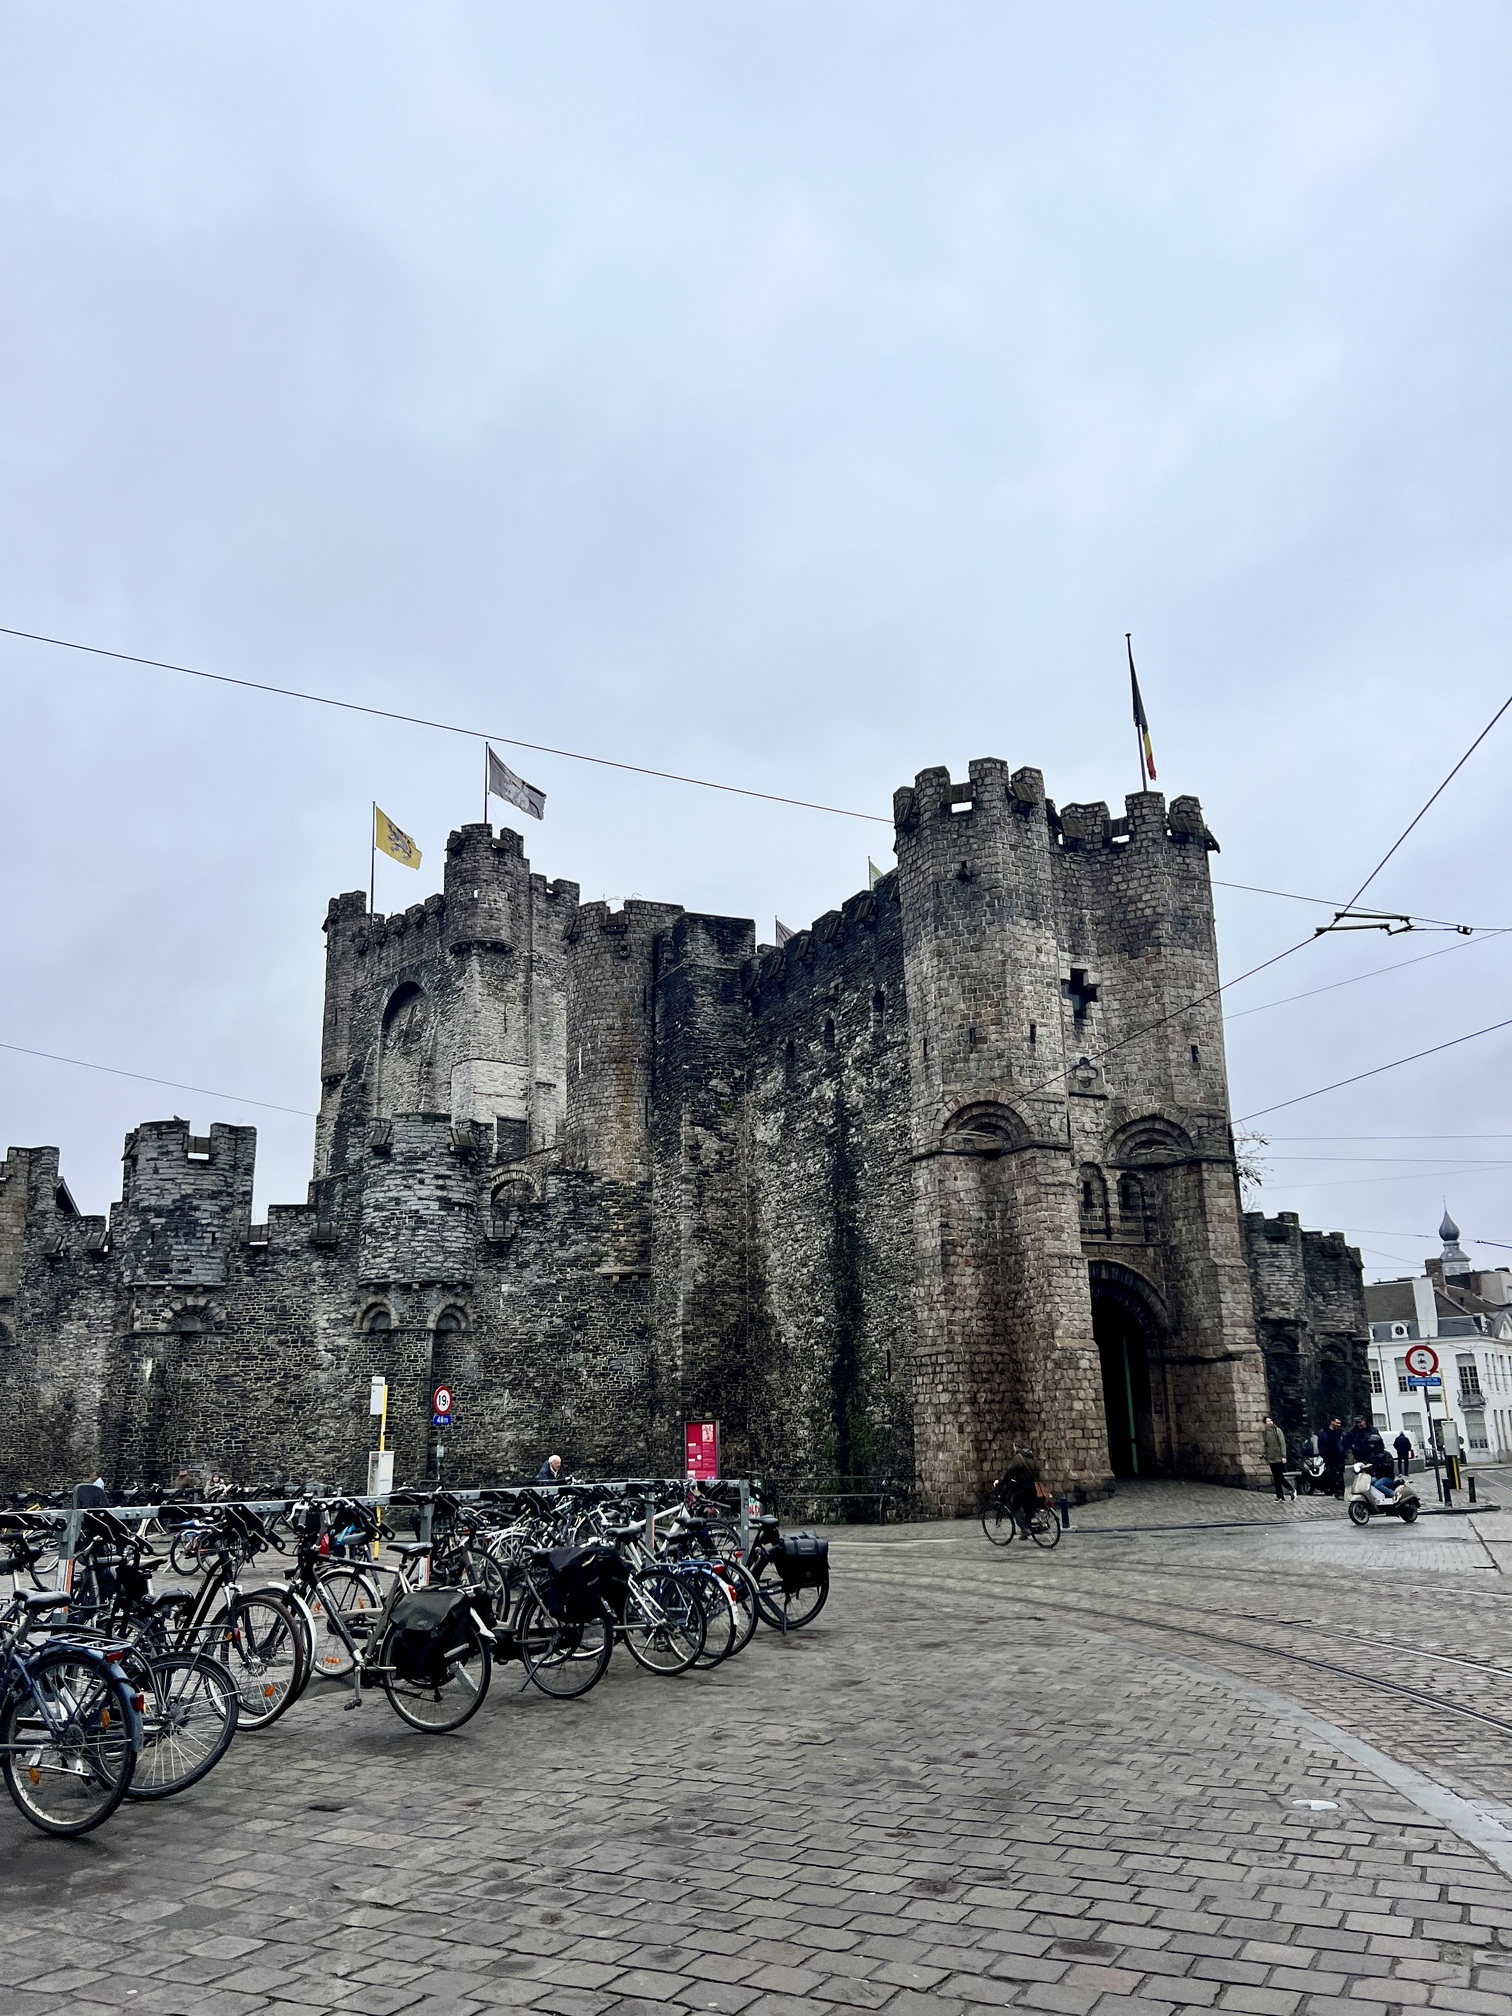 Enchanting view in Gent, Belgium, with ornate medieval architecture and bustling activity, capturing the essence of Belgian heritage and culture; travel guide to Ghent